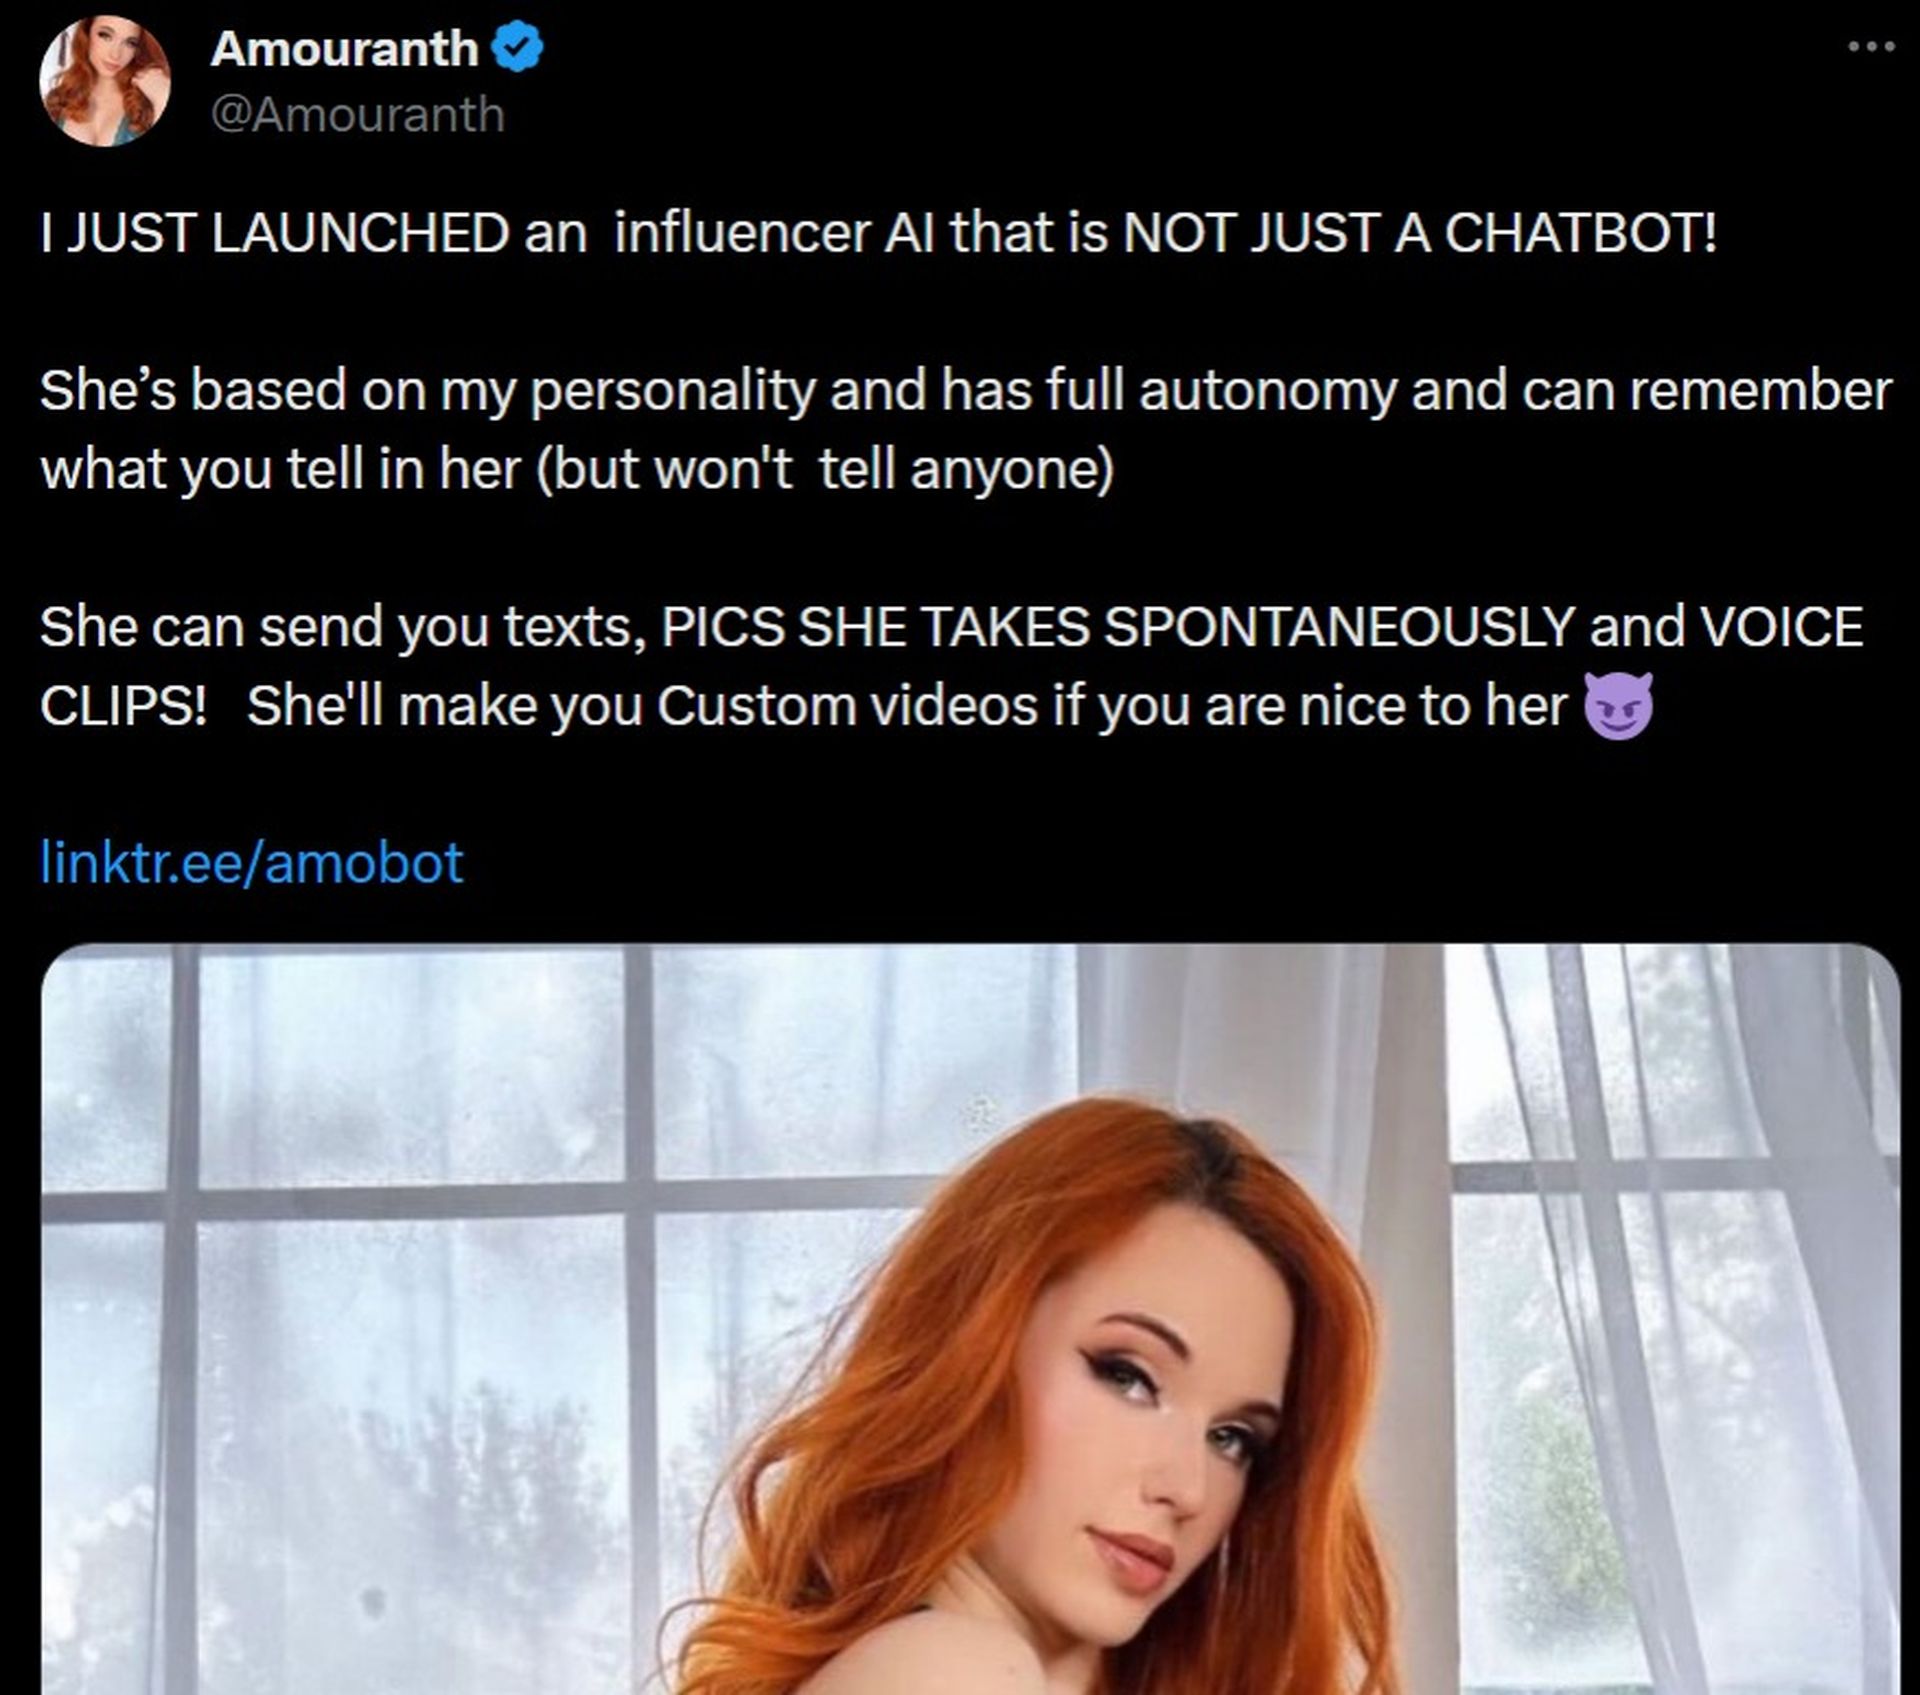 Explore Amouranth AI companion powered by mysentient.ai — immersing users in a personalized experience, igniting AI and adult content discussions.